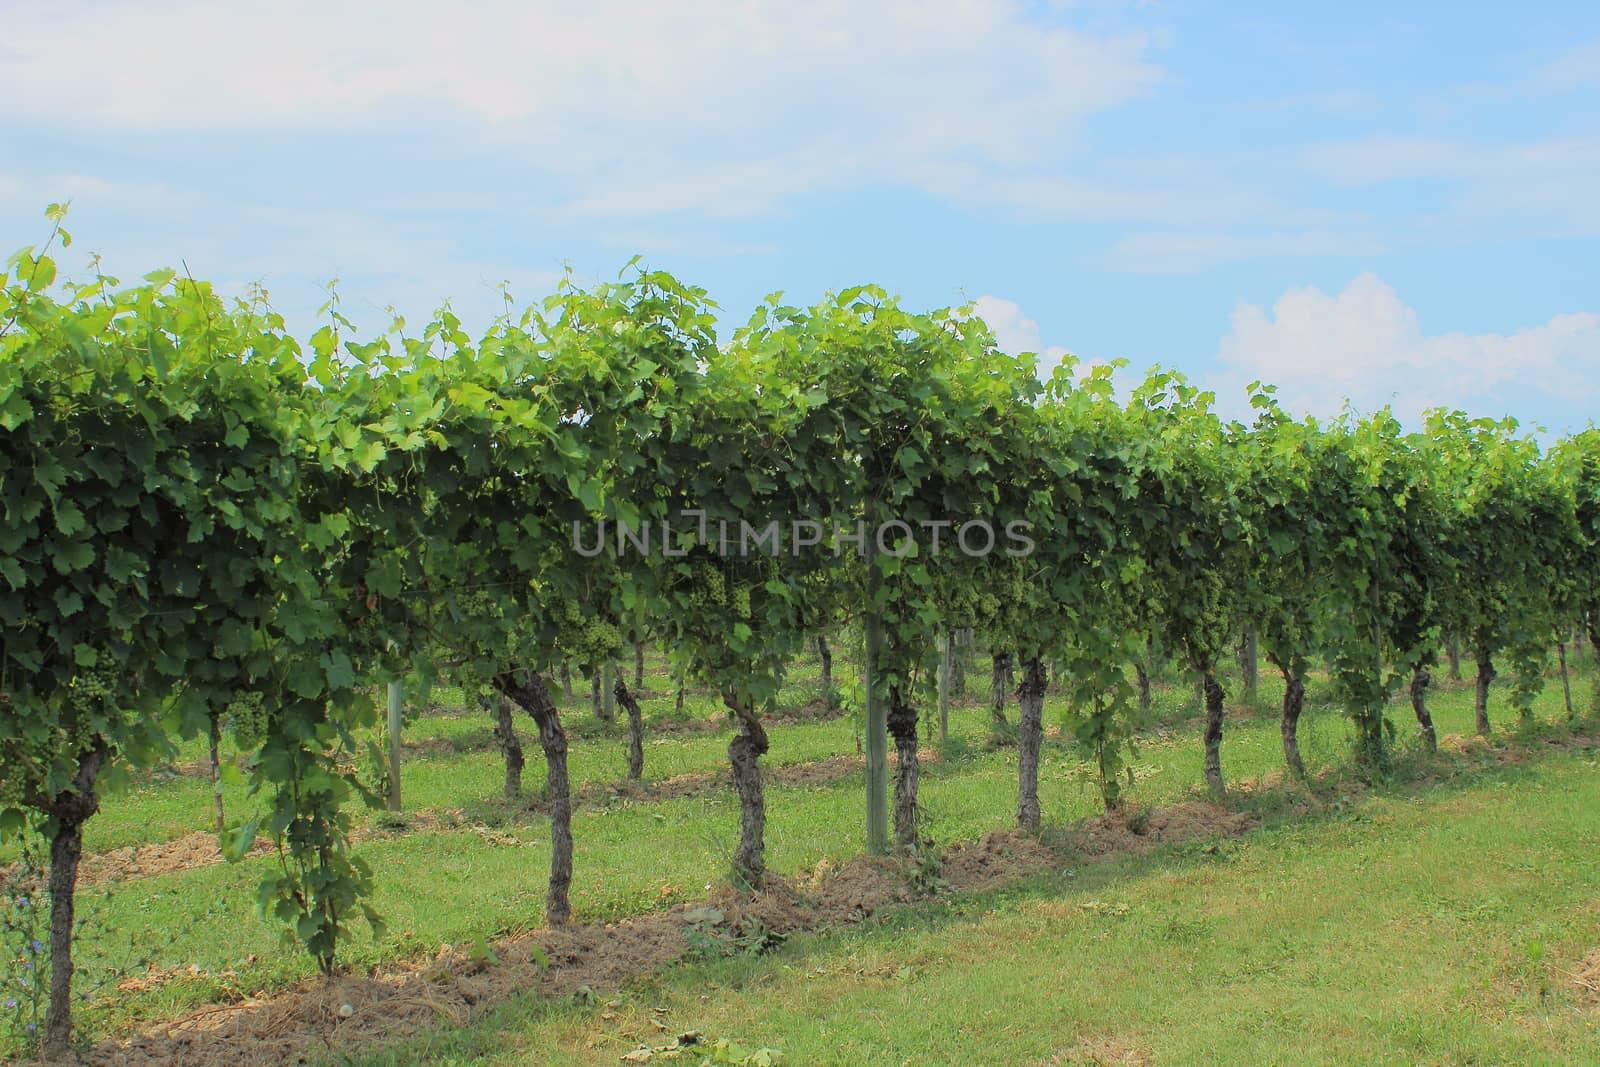 Row of wine stock at vineyard in Italy by HoleInTheBox